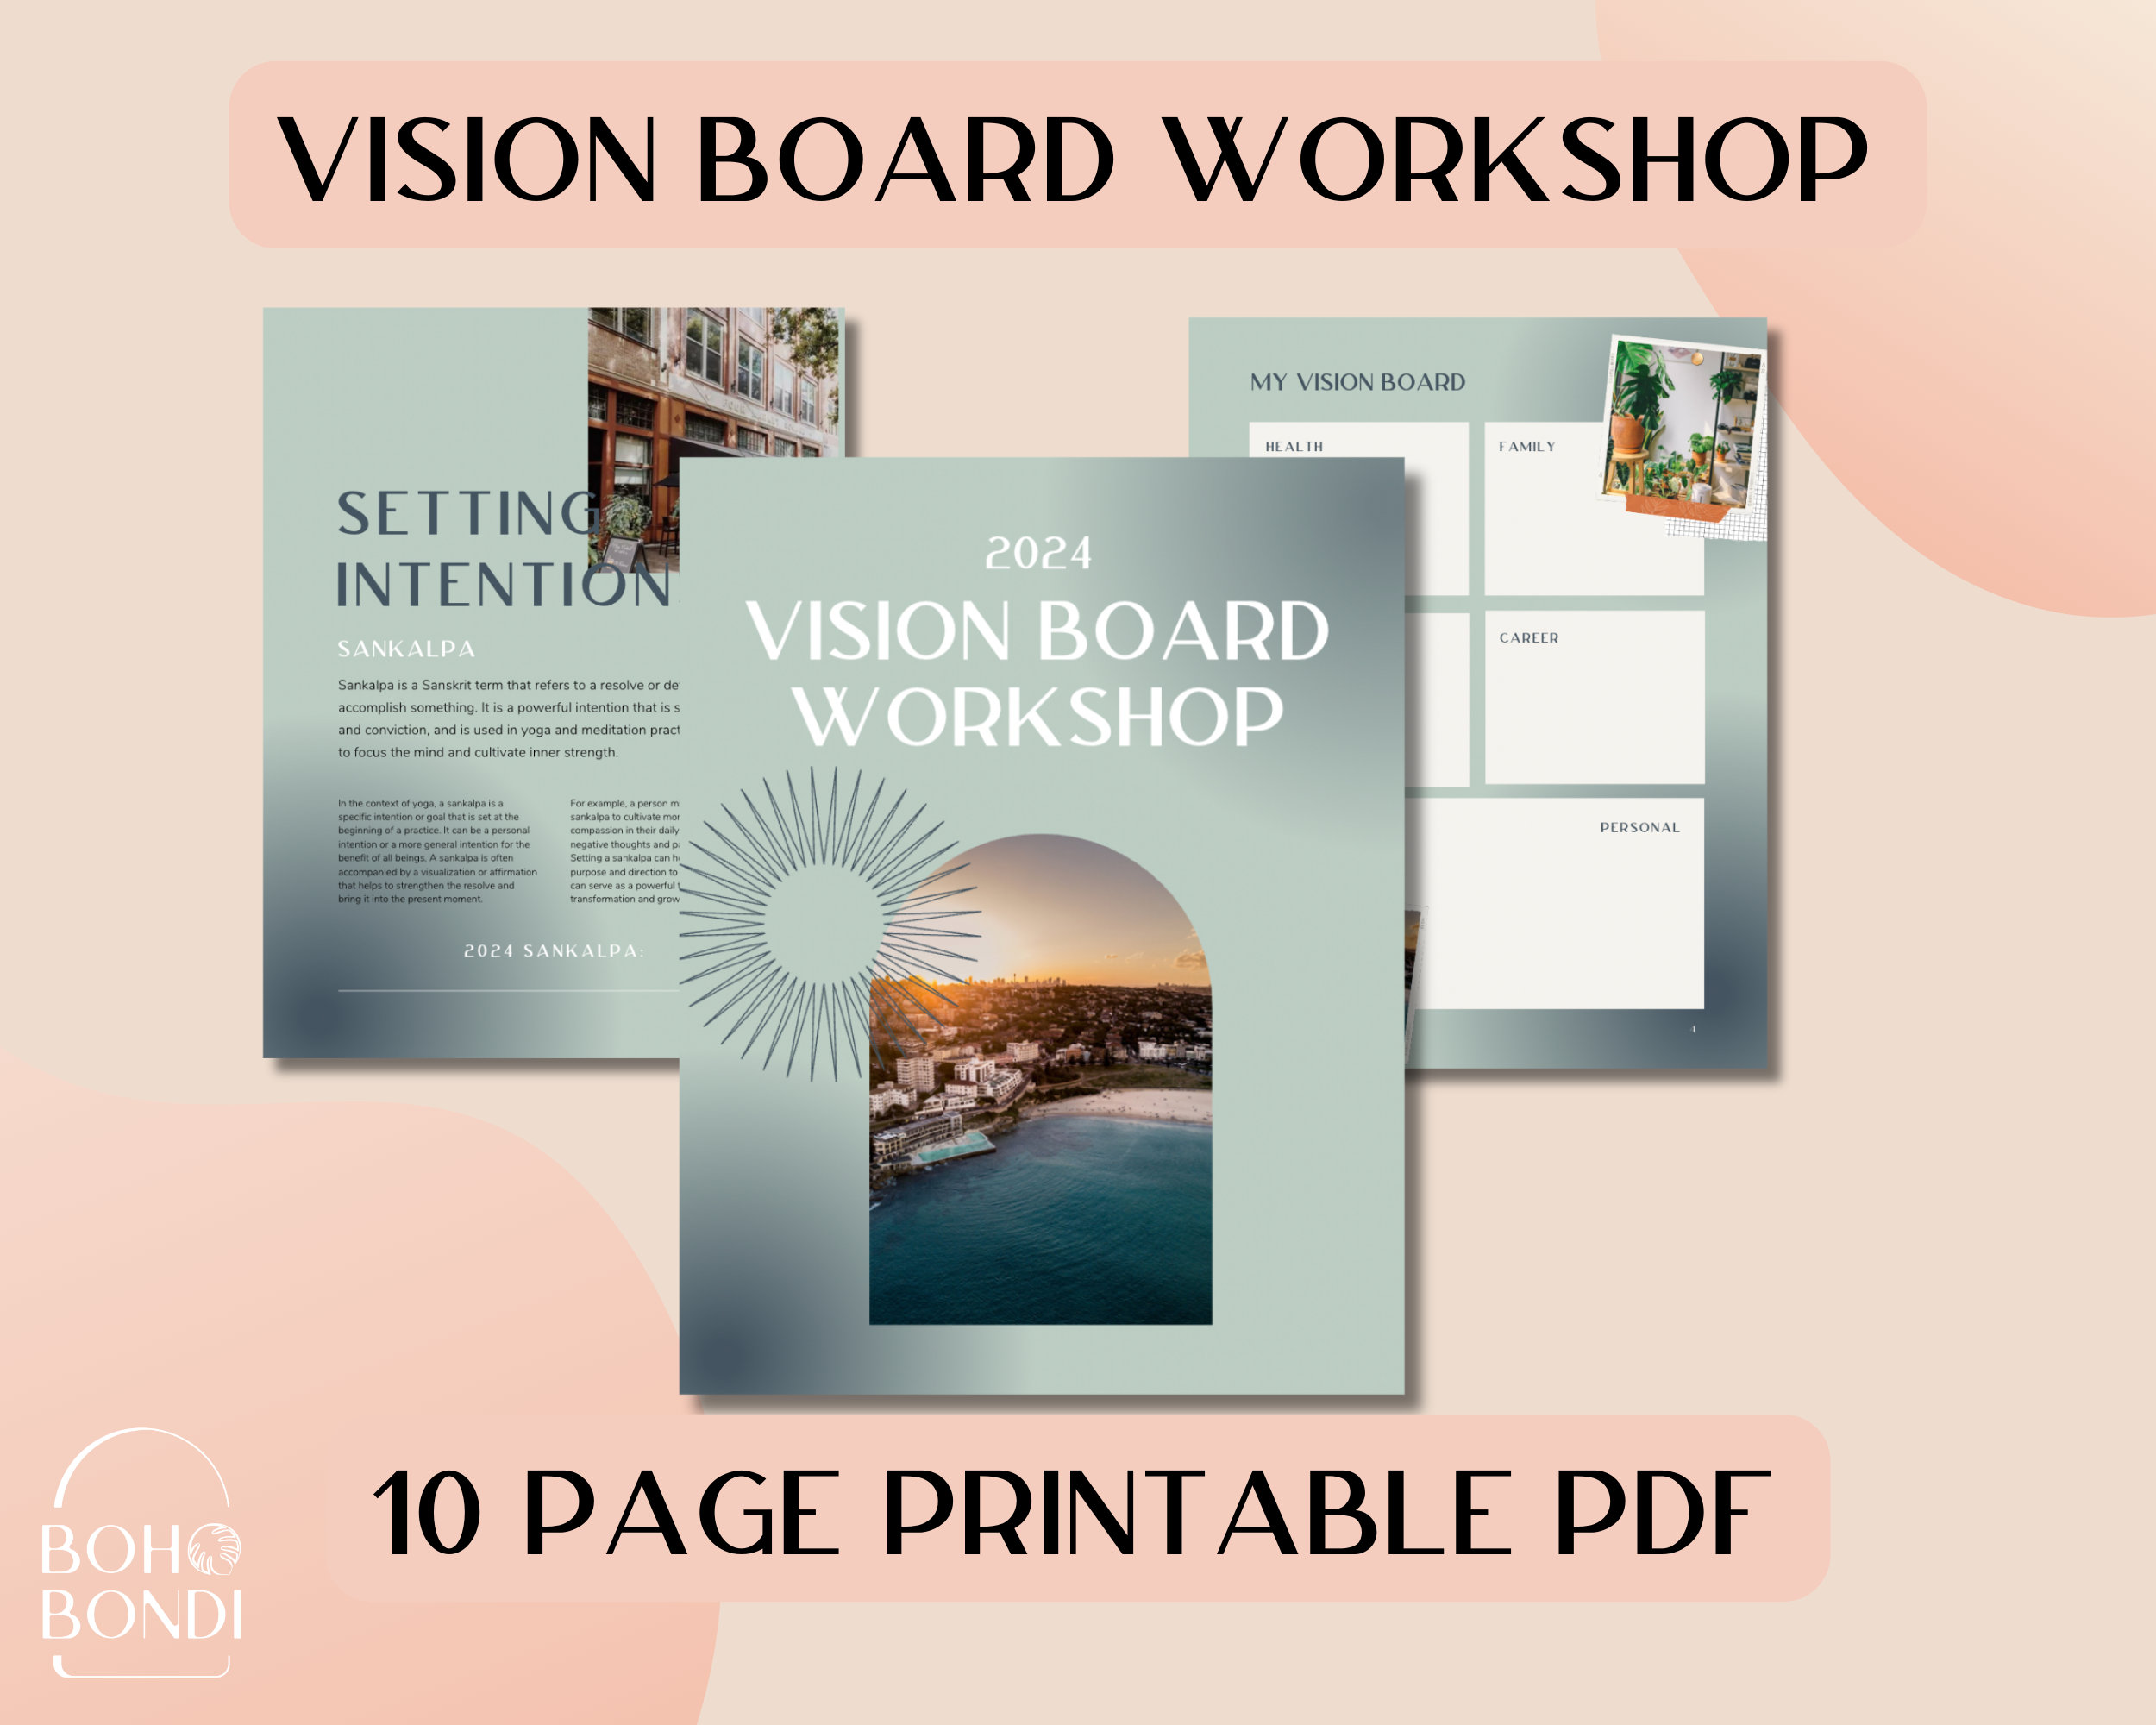 Christian Vision Board Clip Art Book: Christian Vision Board, Scriptural Affirmations on Healing, Success, Spiritual Growth, Journal, & Lots More. .